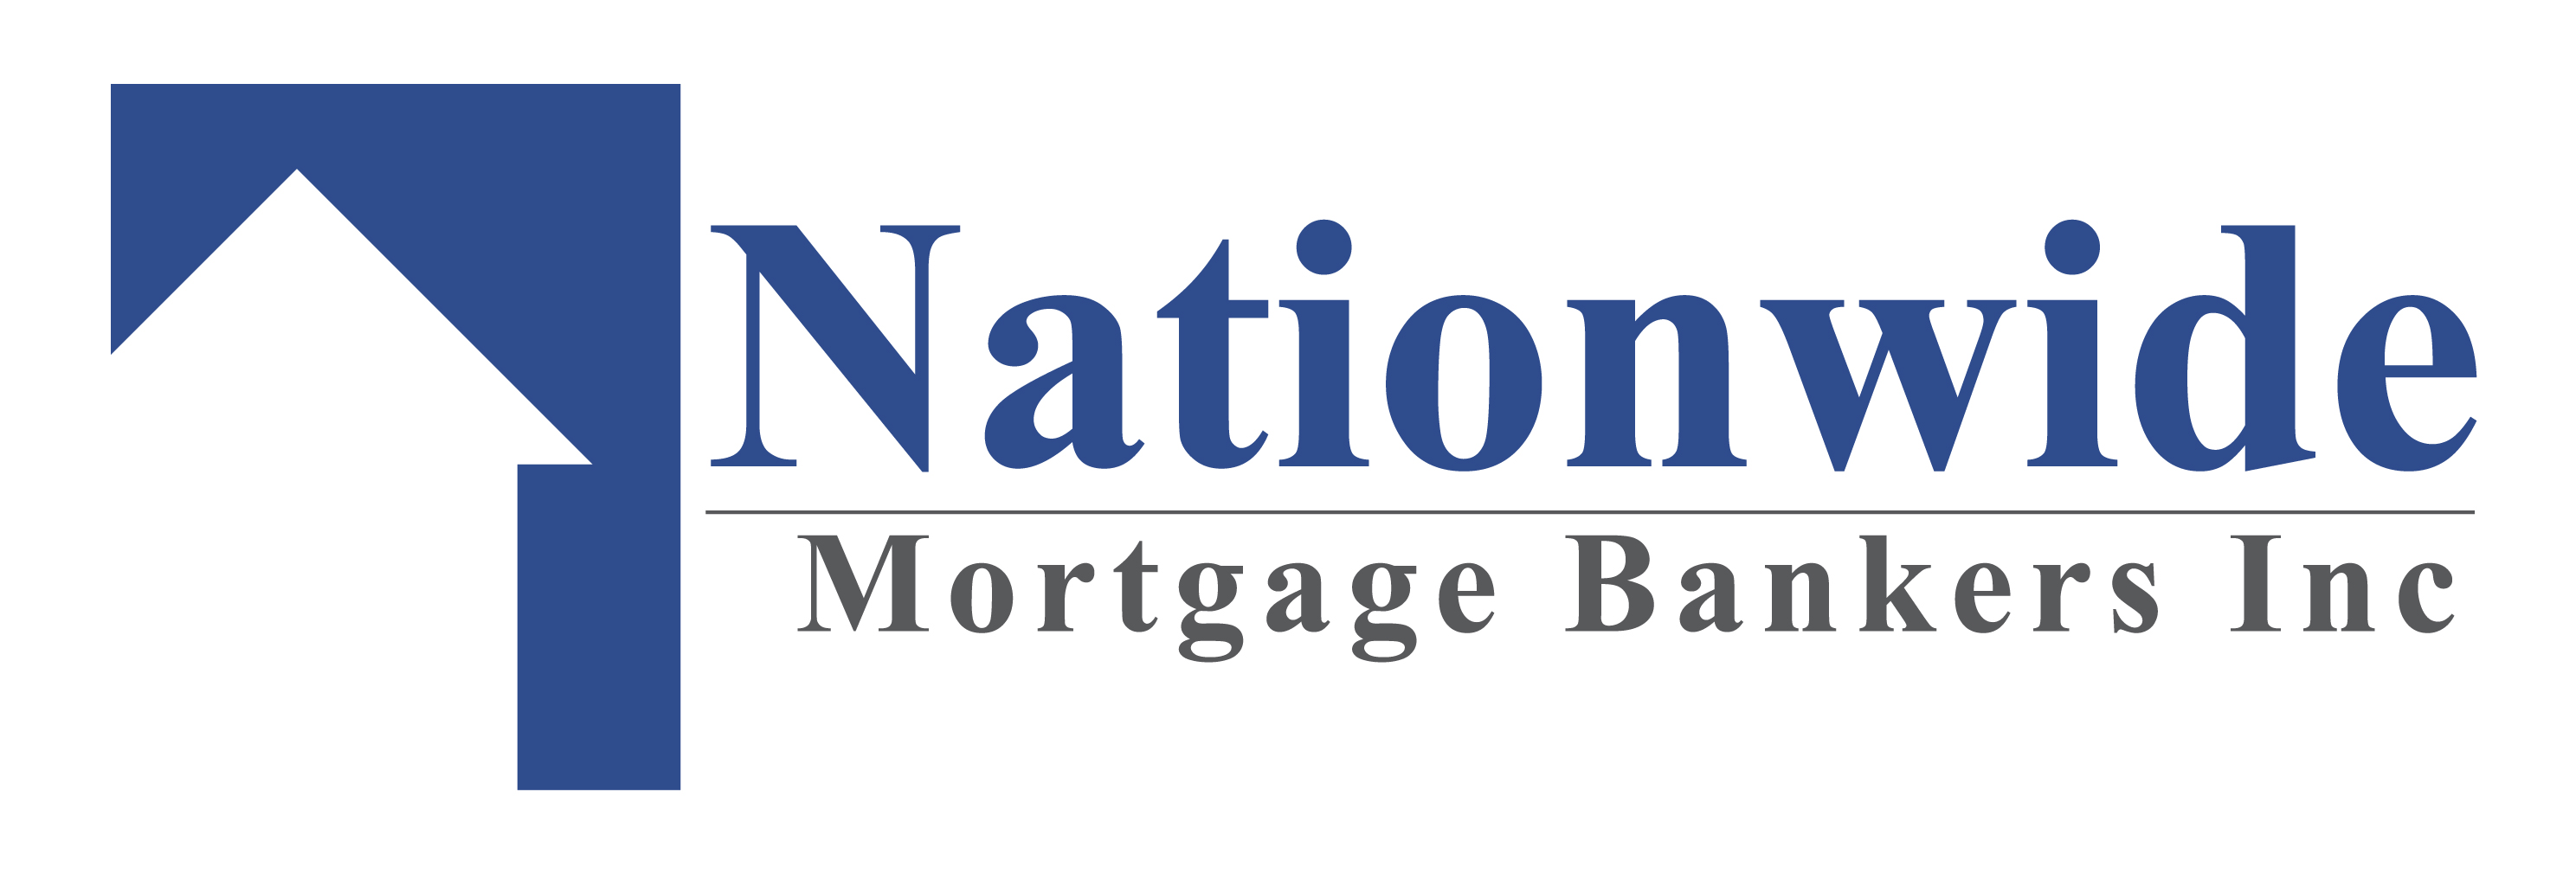 Nationwide Mortgage Bankers, Inc. logo